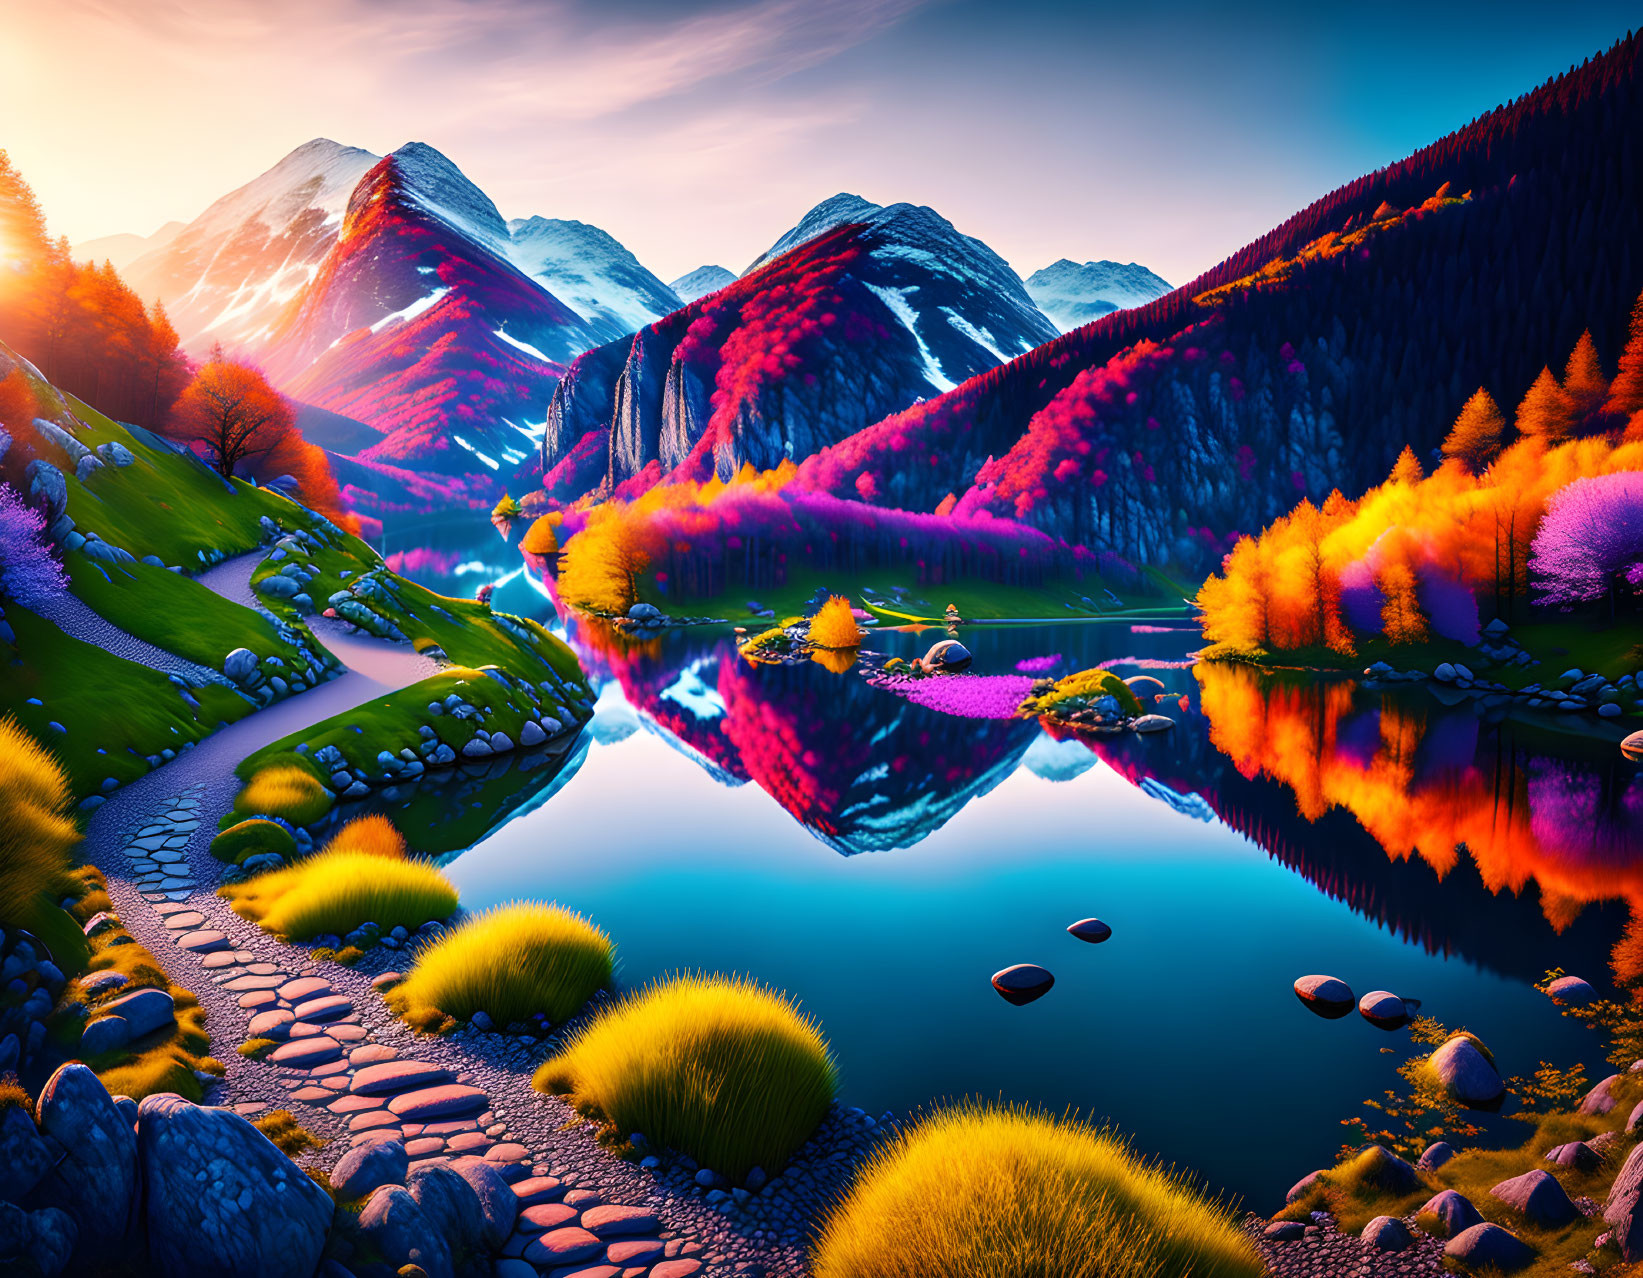 Colorful Trees Reflected in Mirror-Like Lake Amid Majestic Mountains